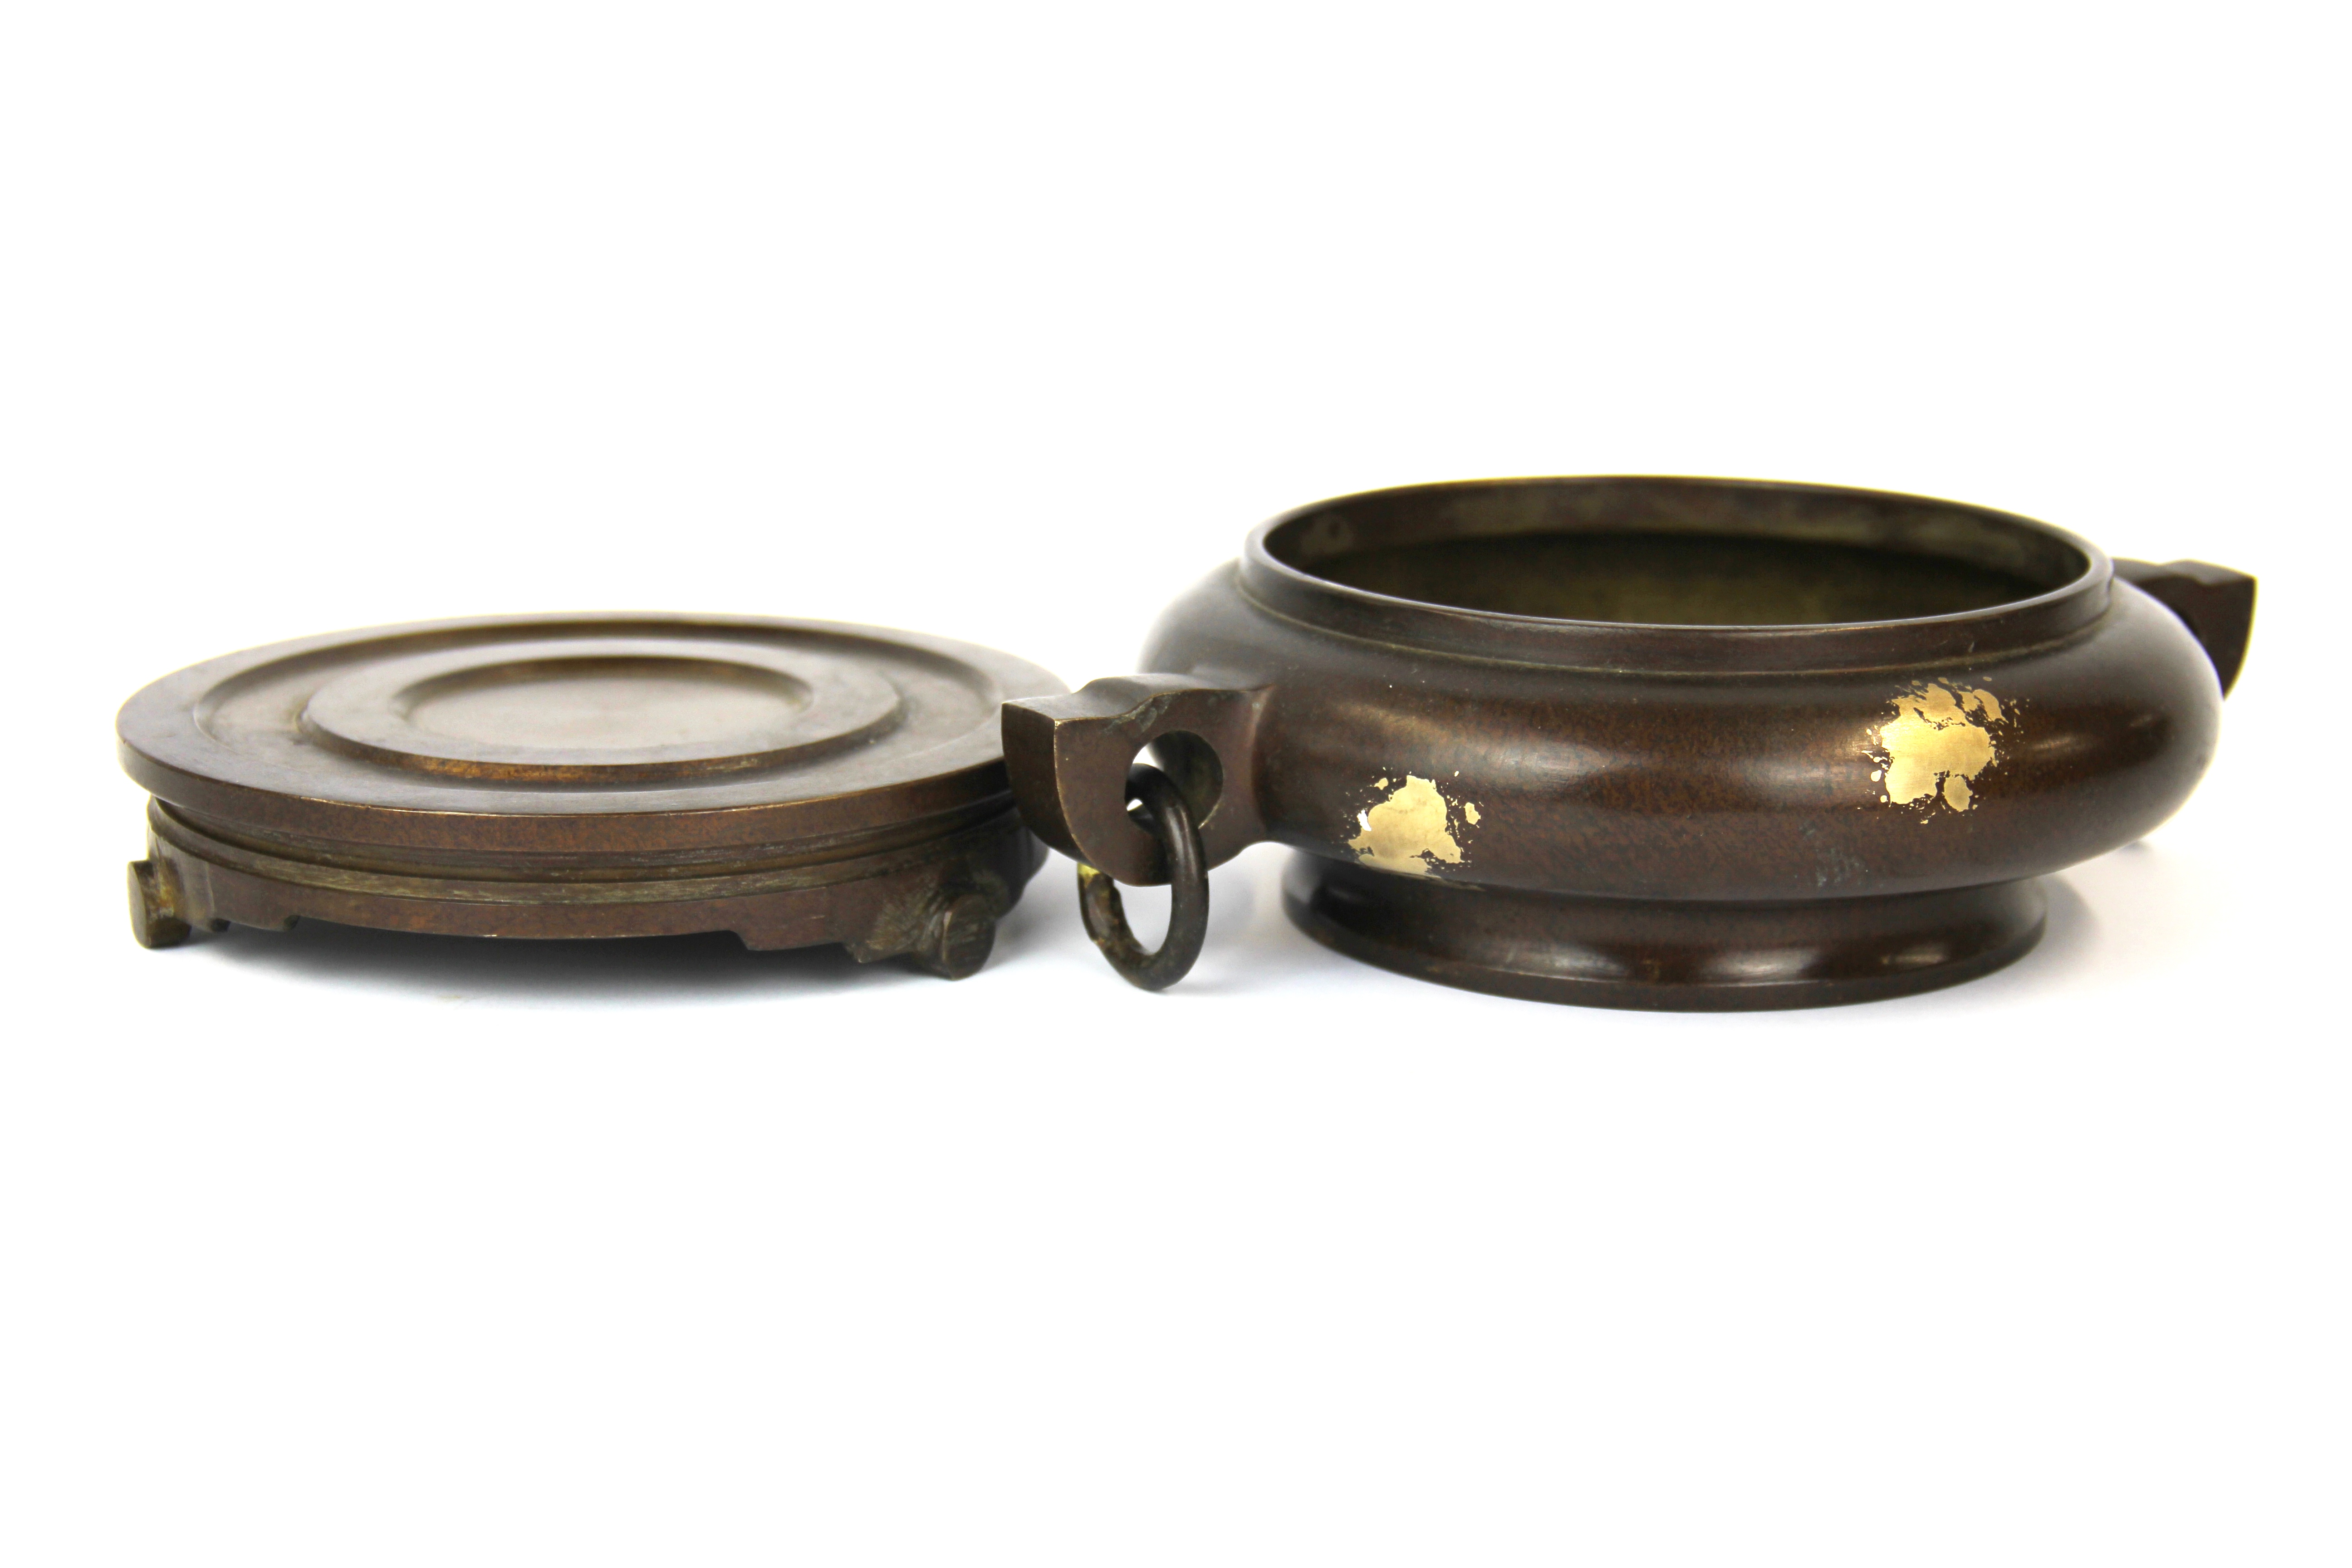 A superb Chinese cast bronze censer and stand with gilt splash decoration, W. 21cm, H. 8.5cm. - Image 2 of 3